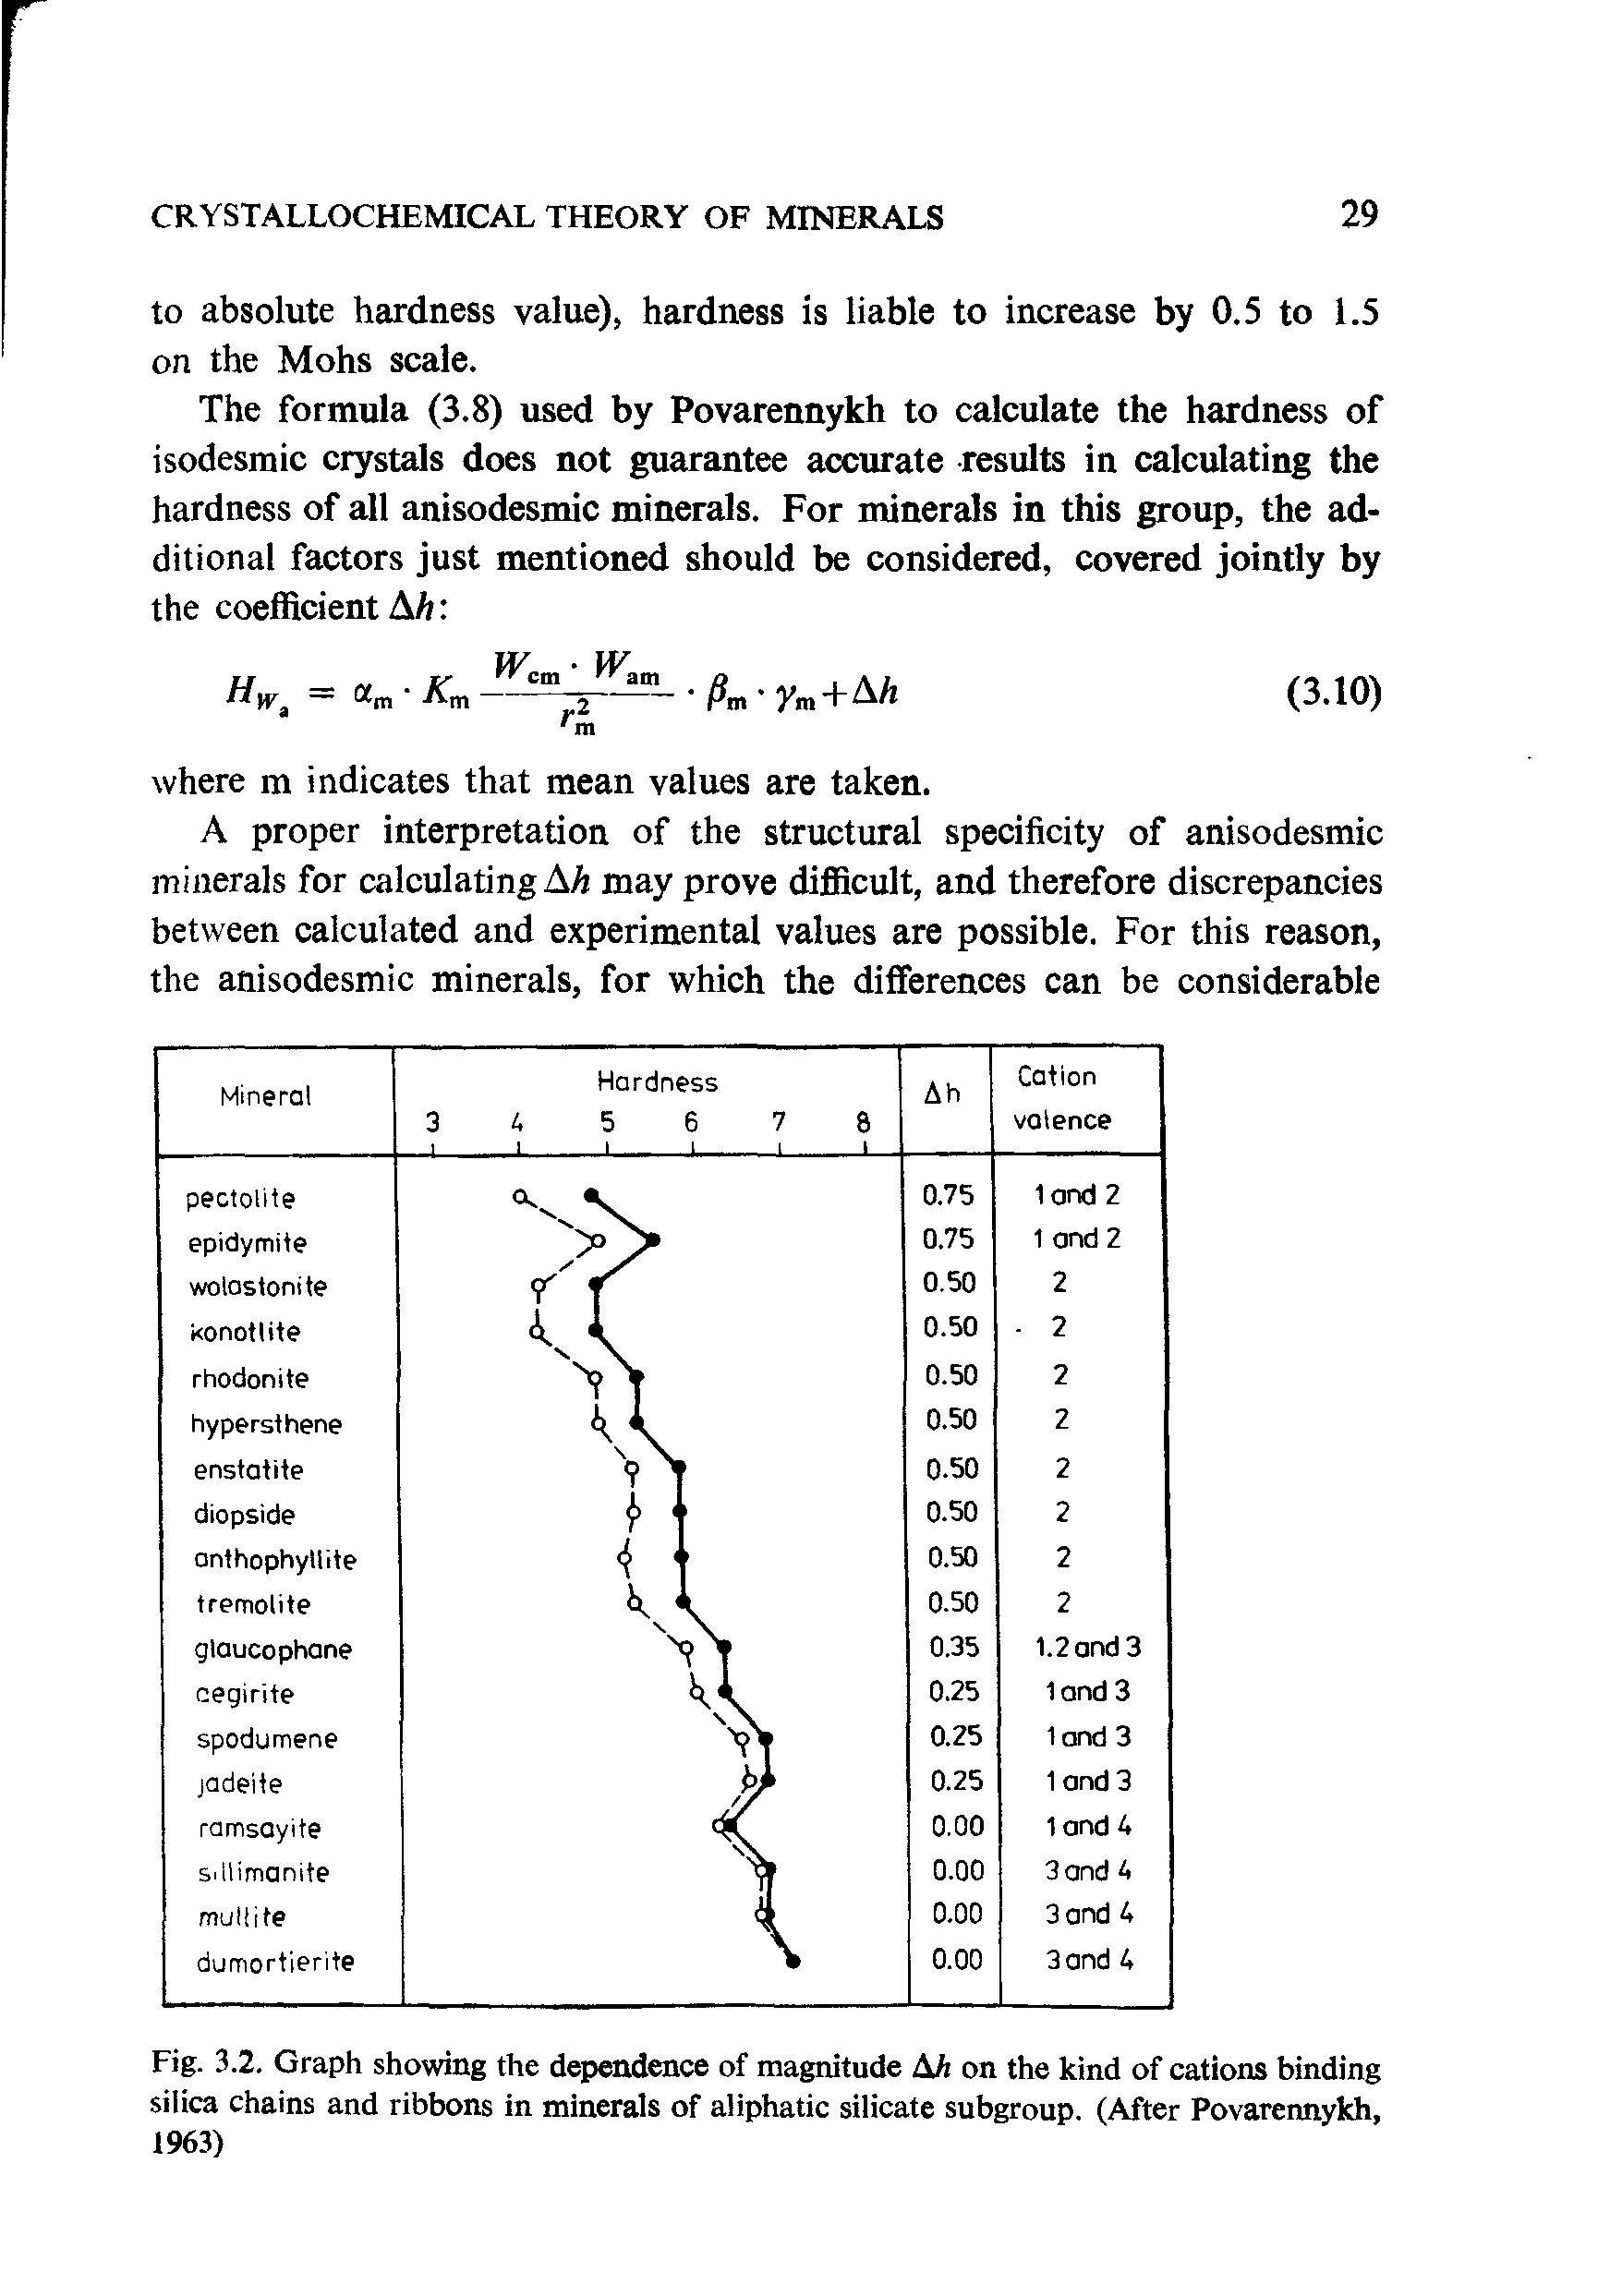 Fig. 3.2. Graph showing the dependence of magnitude Ah on the kind of cations binding silica chains and ribbons in minerals of aliphatic silicate subgroup. (After Povarennykh, 1963)...